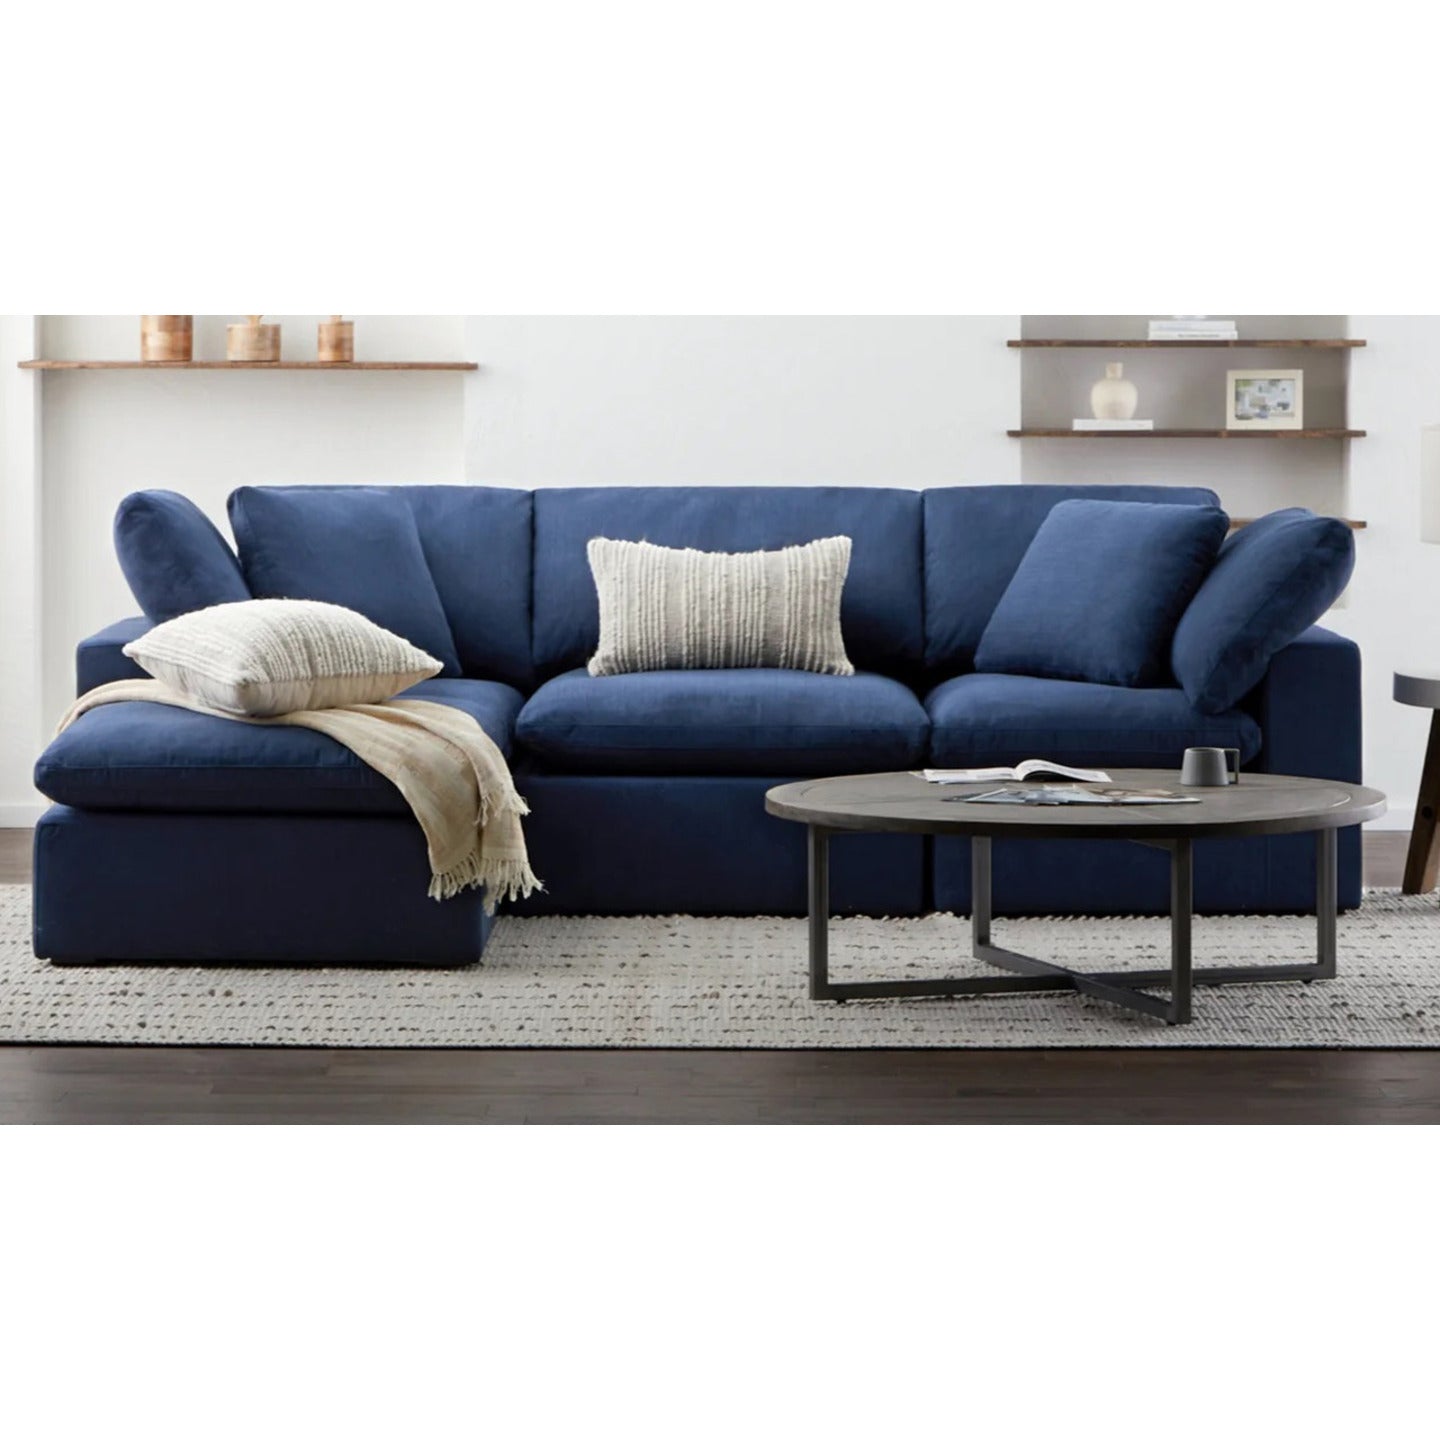 Haven 3 Seater Sectional Sofa With Ottoman, Navy Blue